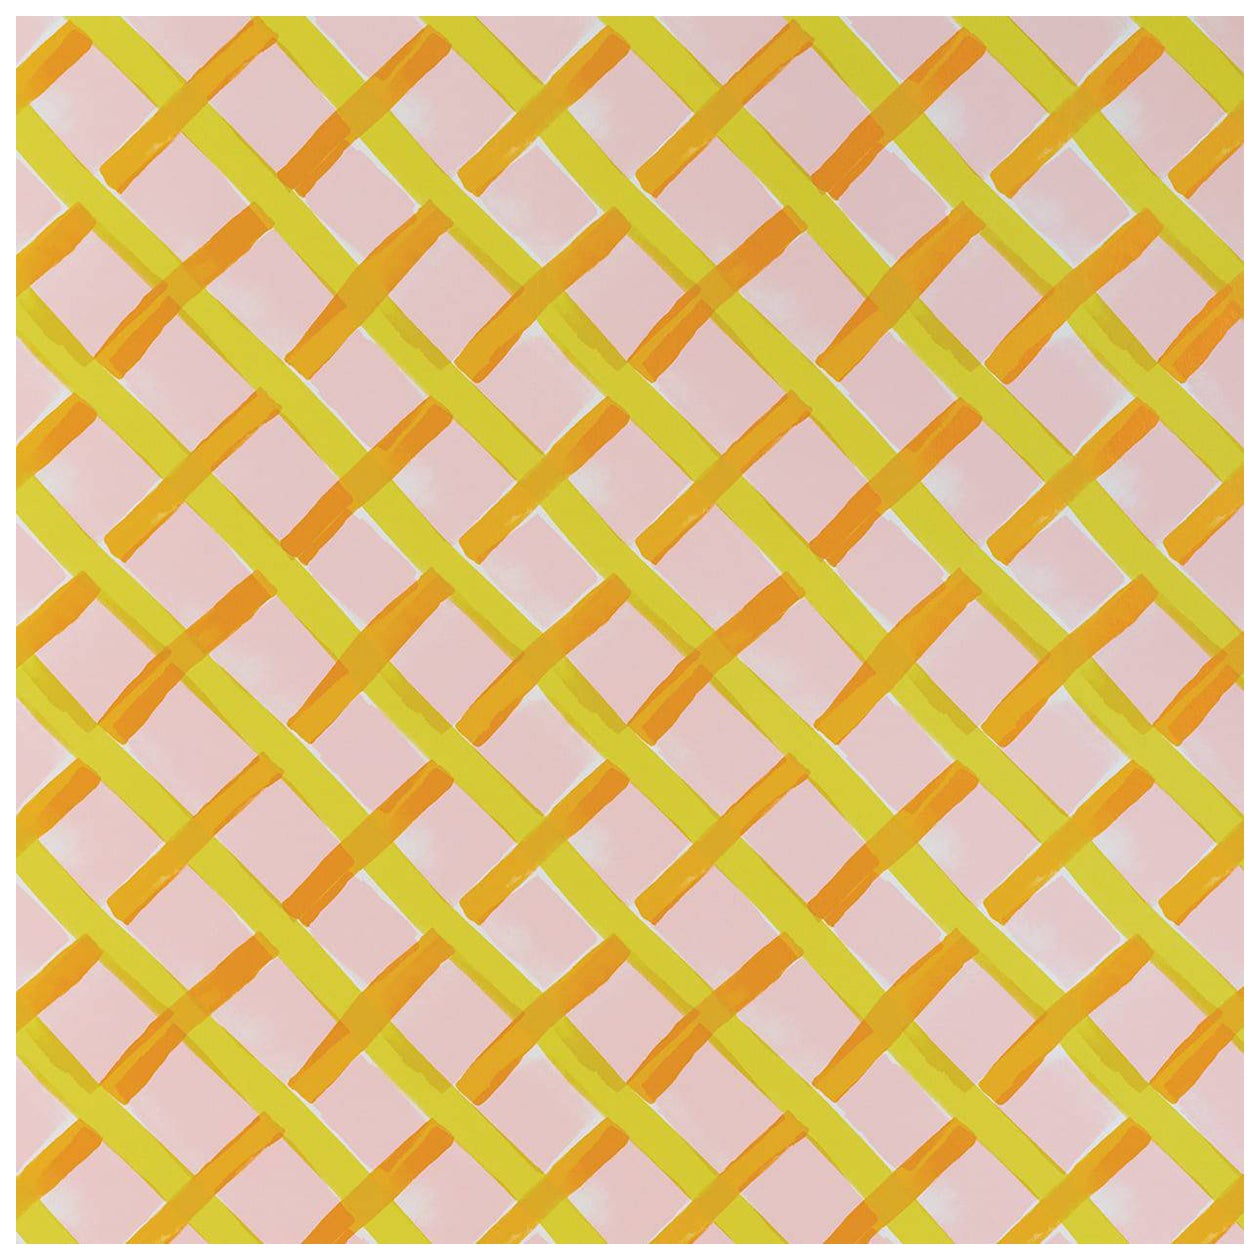 PETITE FRITURE Croisillon Wallpaper Pink by Les Crafties